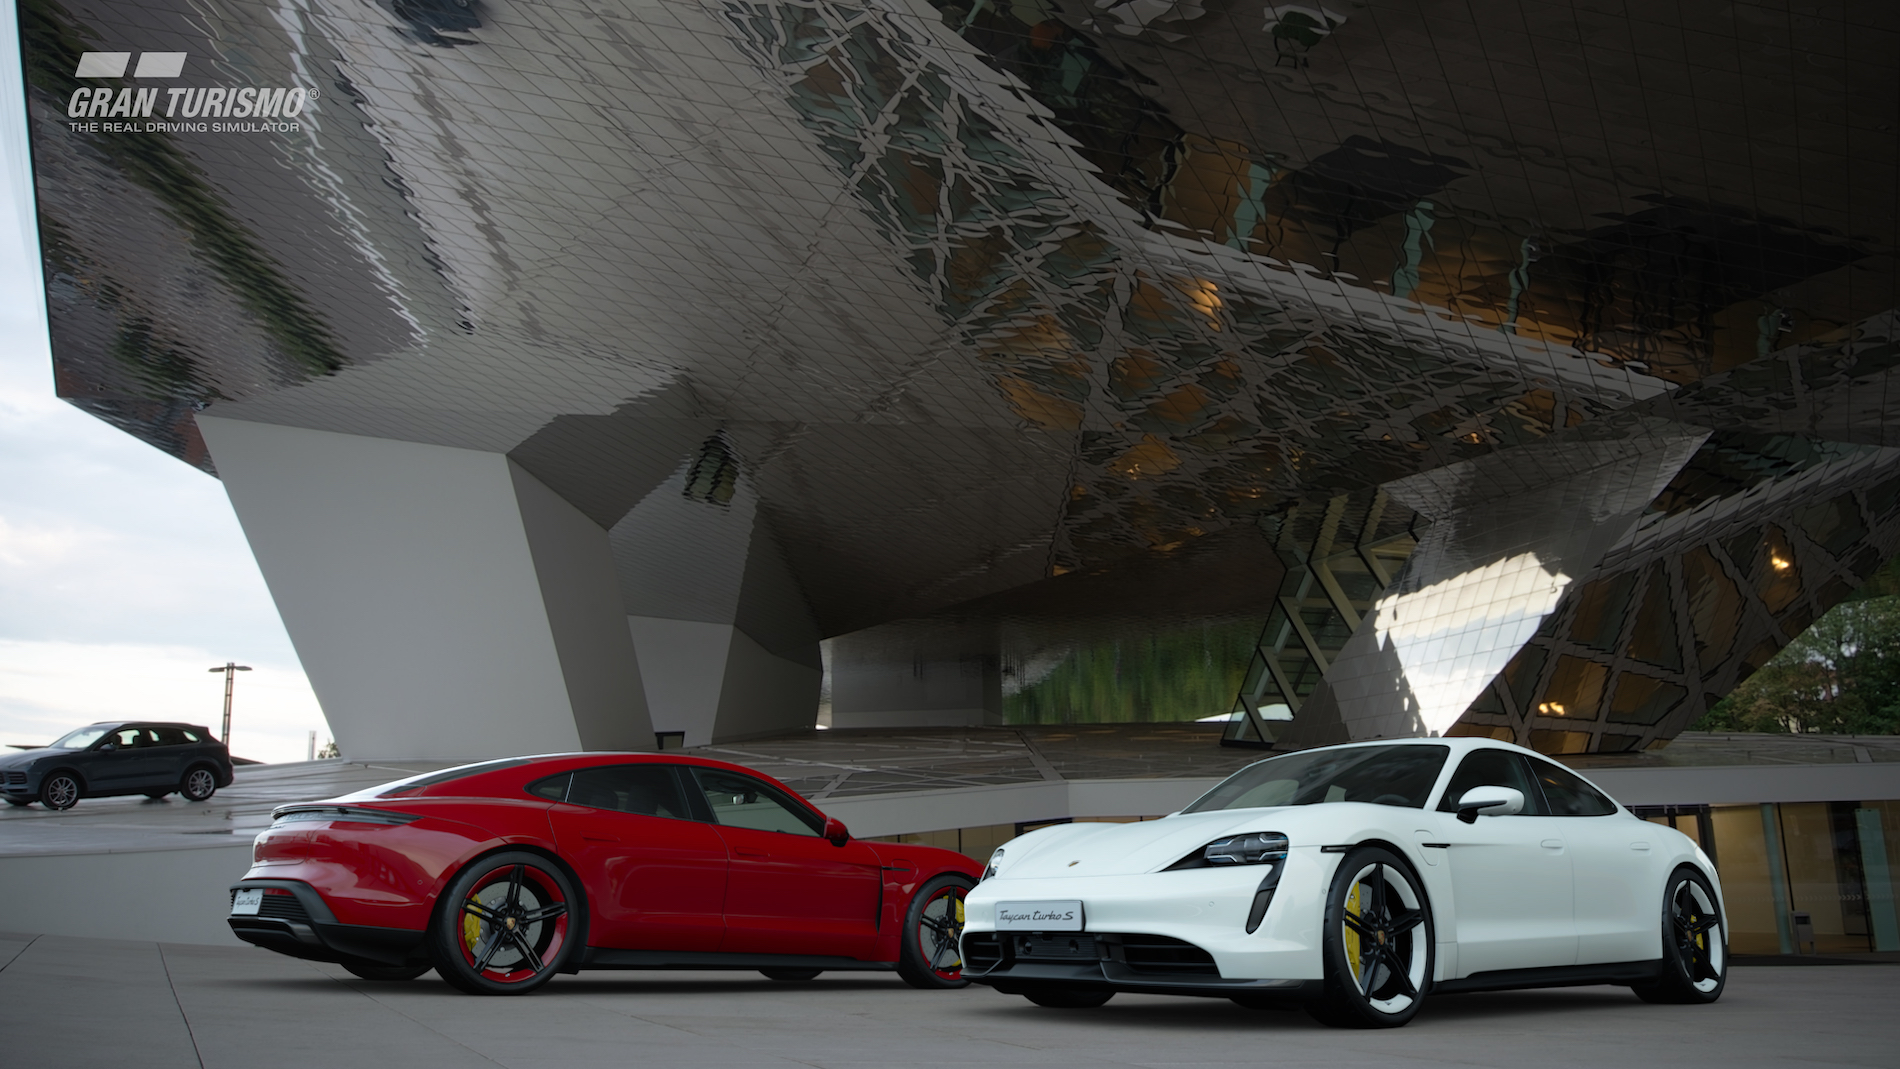 Porsche Taycan Taycan Turbo S coming to Gran Turismo Sport (Trailer) high_taycan_turbo_s_in_video_game_gran_turismo_sport_2019_porsche_ag-5